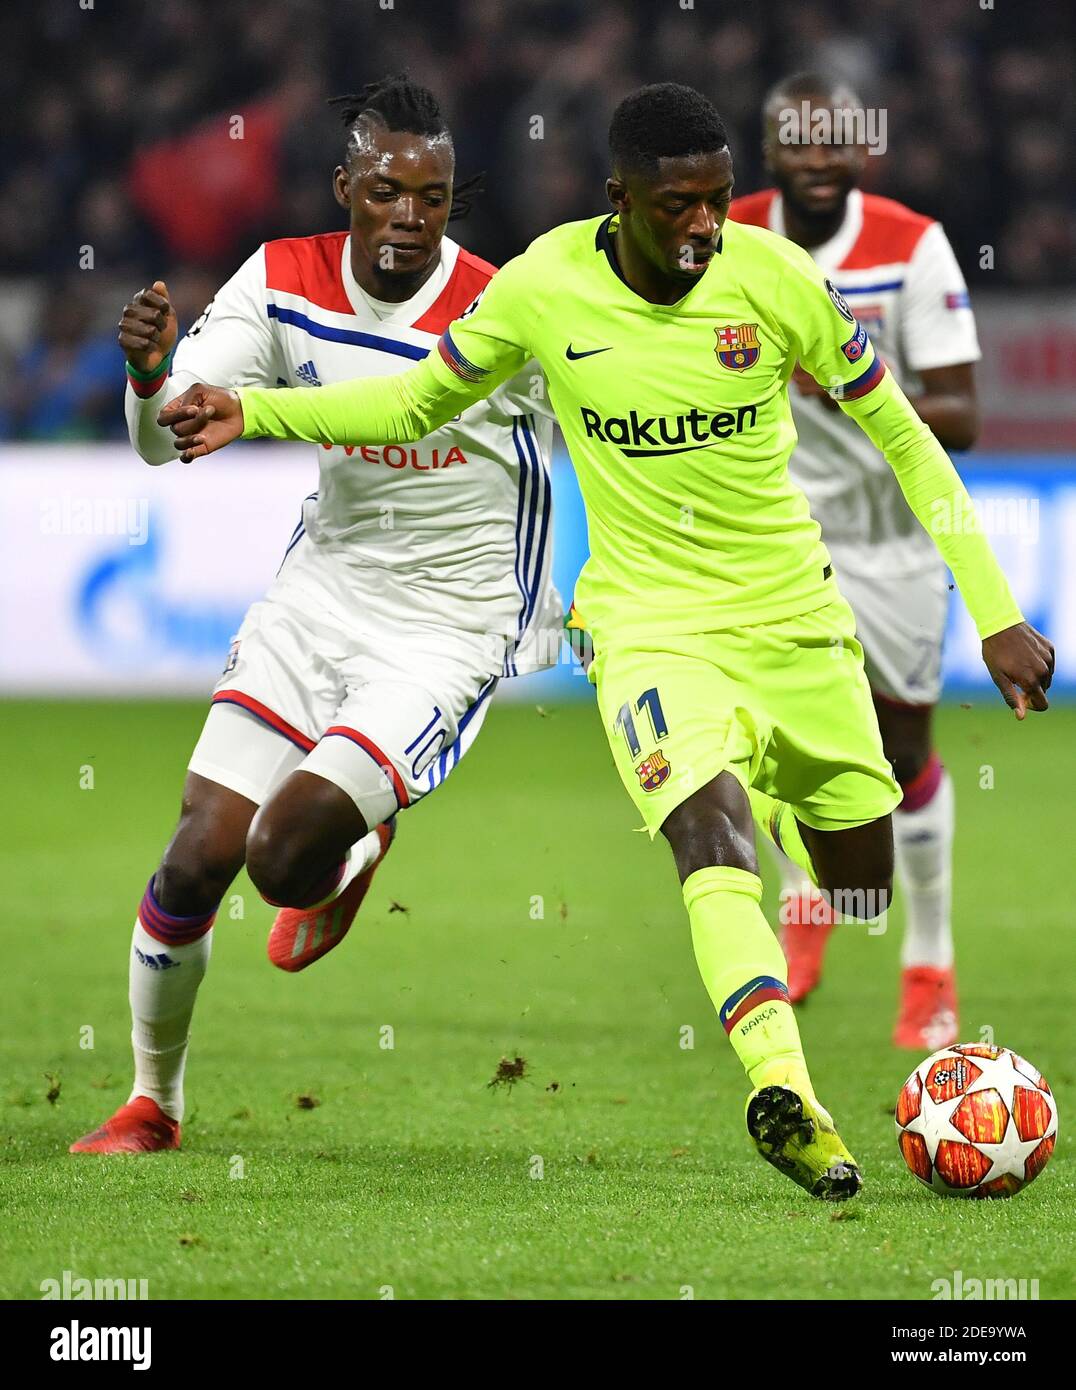 Barcelona's Moussa Dembele during the UEFA Champions League round of 16 first leg football match between Lyon (OL) and FC Barcelona on February 19, 2019, at the Groupama Stadium in Decines-Charpieu, near Lyon, central-eastern France. Photo by Christian Liewig/ABACAPRESS.COM Stock Photo